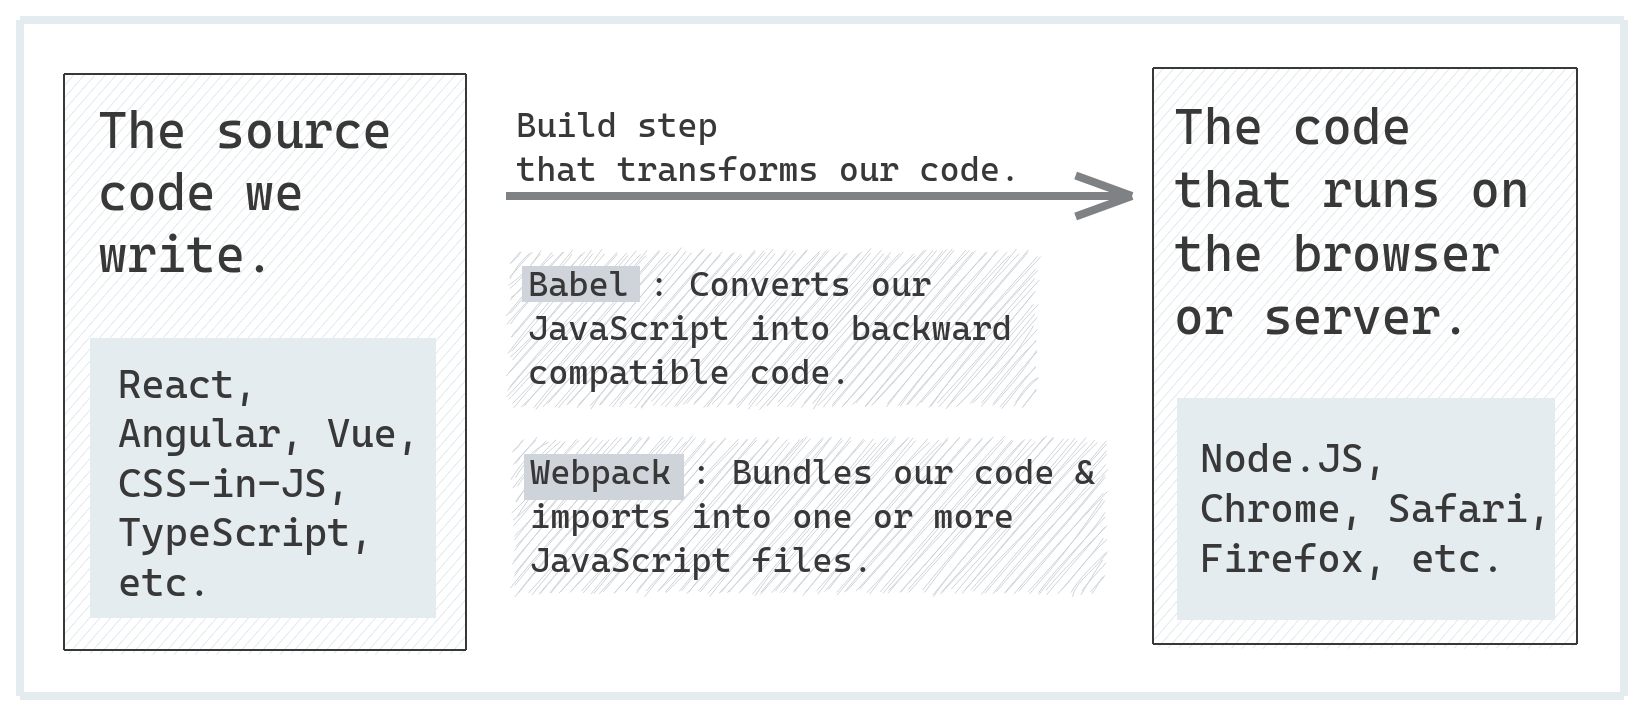 How Polyfill Works in Babel. Understand how polyfill works in your